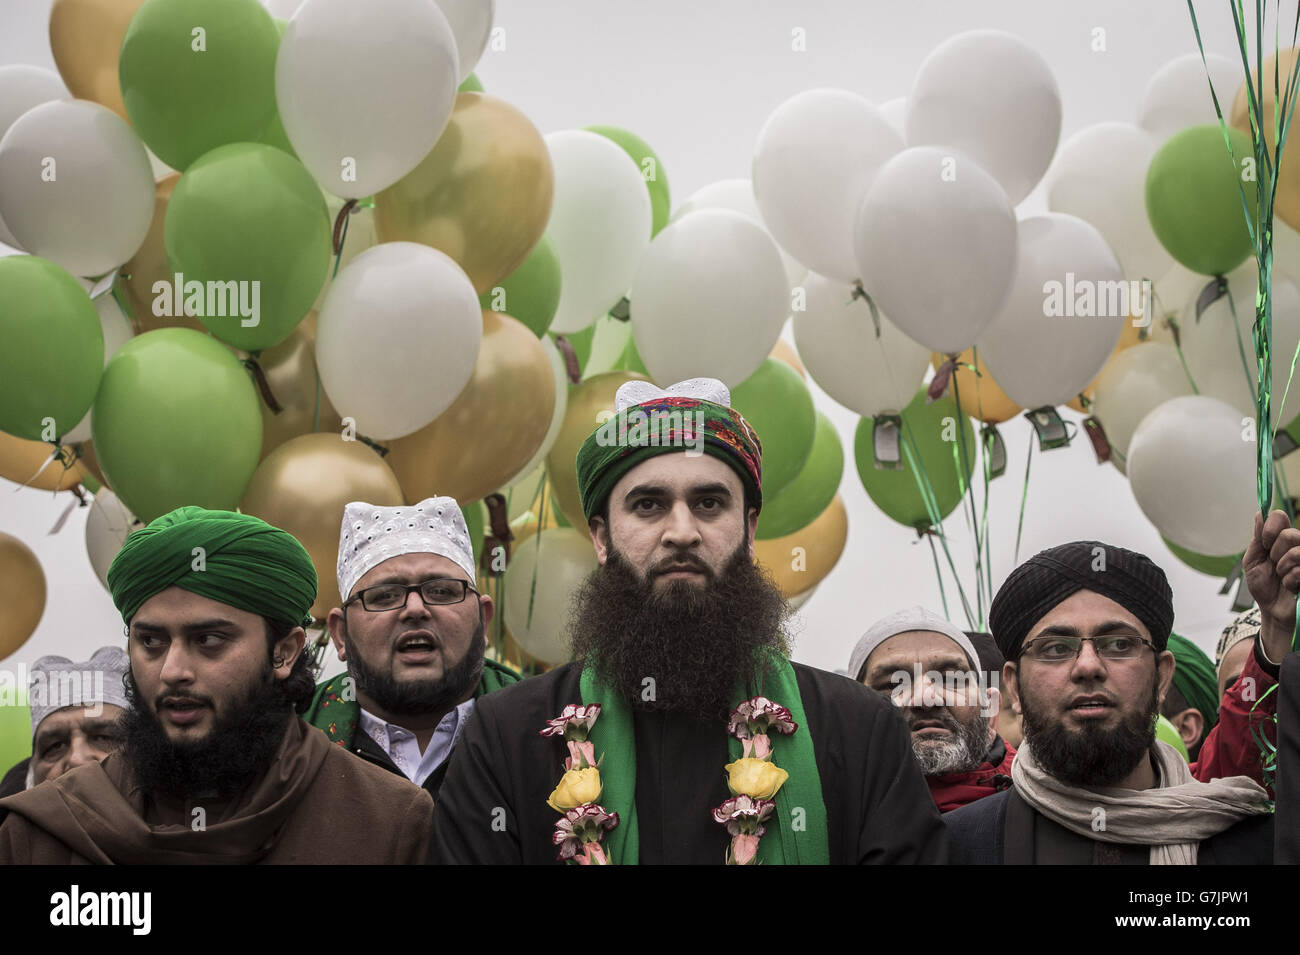 Members from the Easton Jamia Masjid, also known as the Easton Mosque, take part in a religious procession celebrating the Prophet Muhammad's birthday, through the streets of Easton, Bristol. Stock Photo